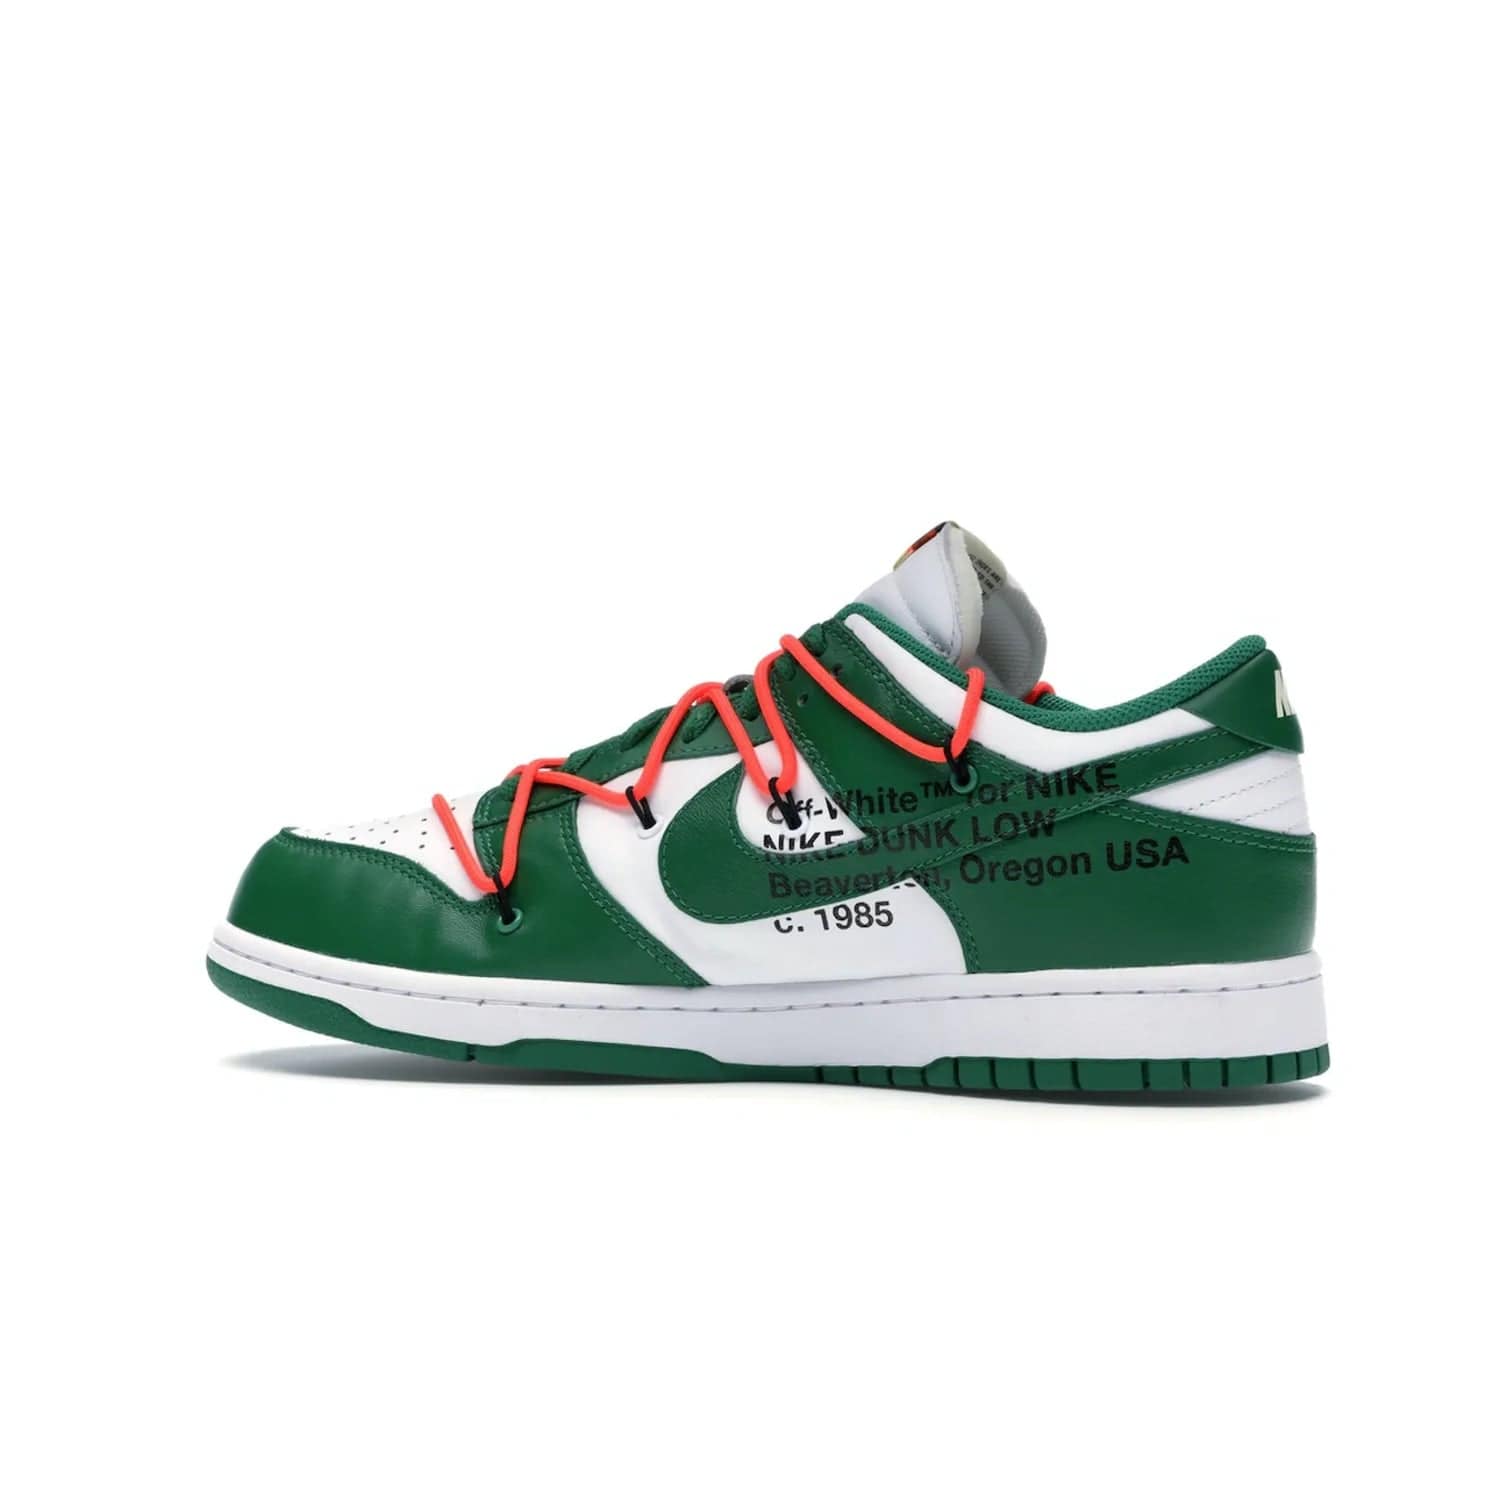 Nike Dunk Low Off-White Pine Green - Image 21 - Only at www.BallersClubKickz.com - The Nike Dunk Low Off-White Pine Green combines classic 1980s style with modern-day design. Featuring white leather uppers and pine green overlays, these classic kicks feature secondary lacing system, zip-ties and signature Off-White text. Releasing in December 2019, these shoes are a timeless classic for any wardrobe.